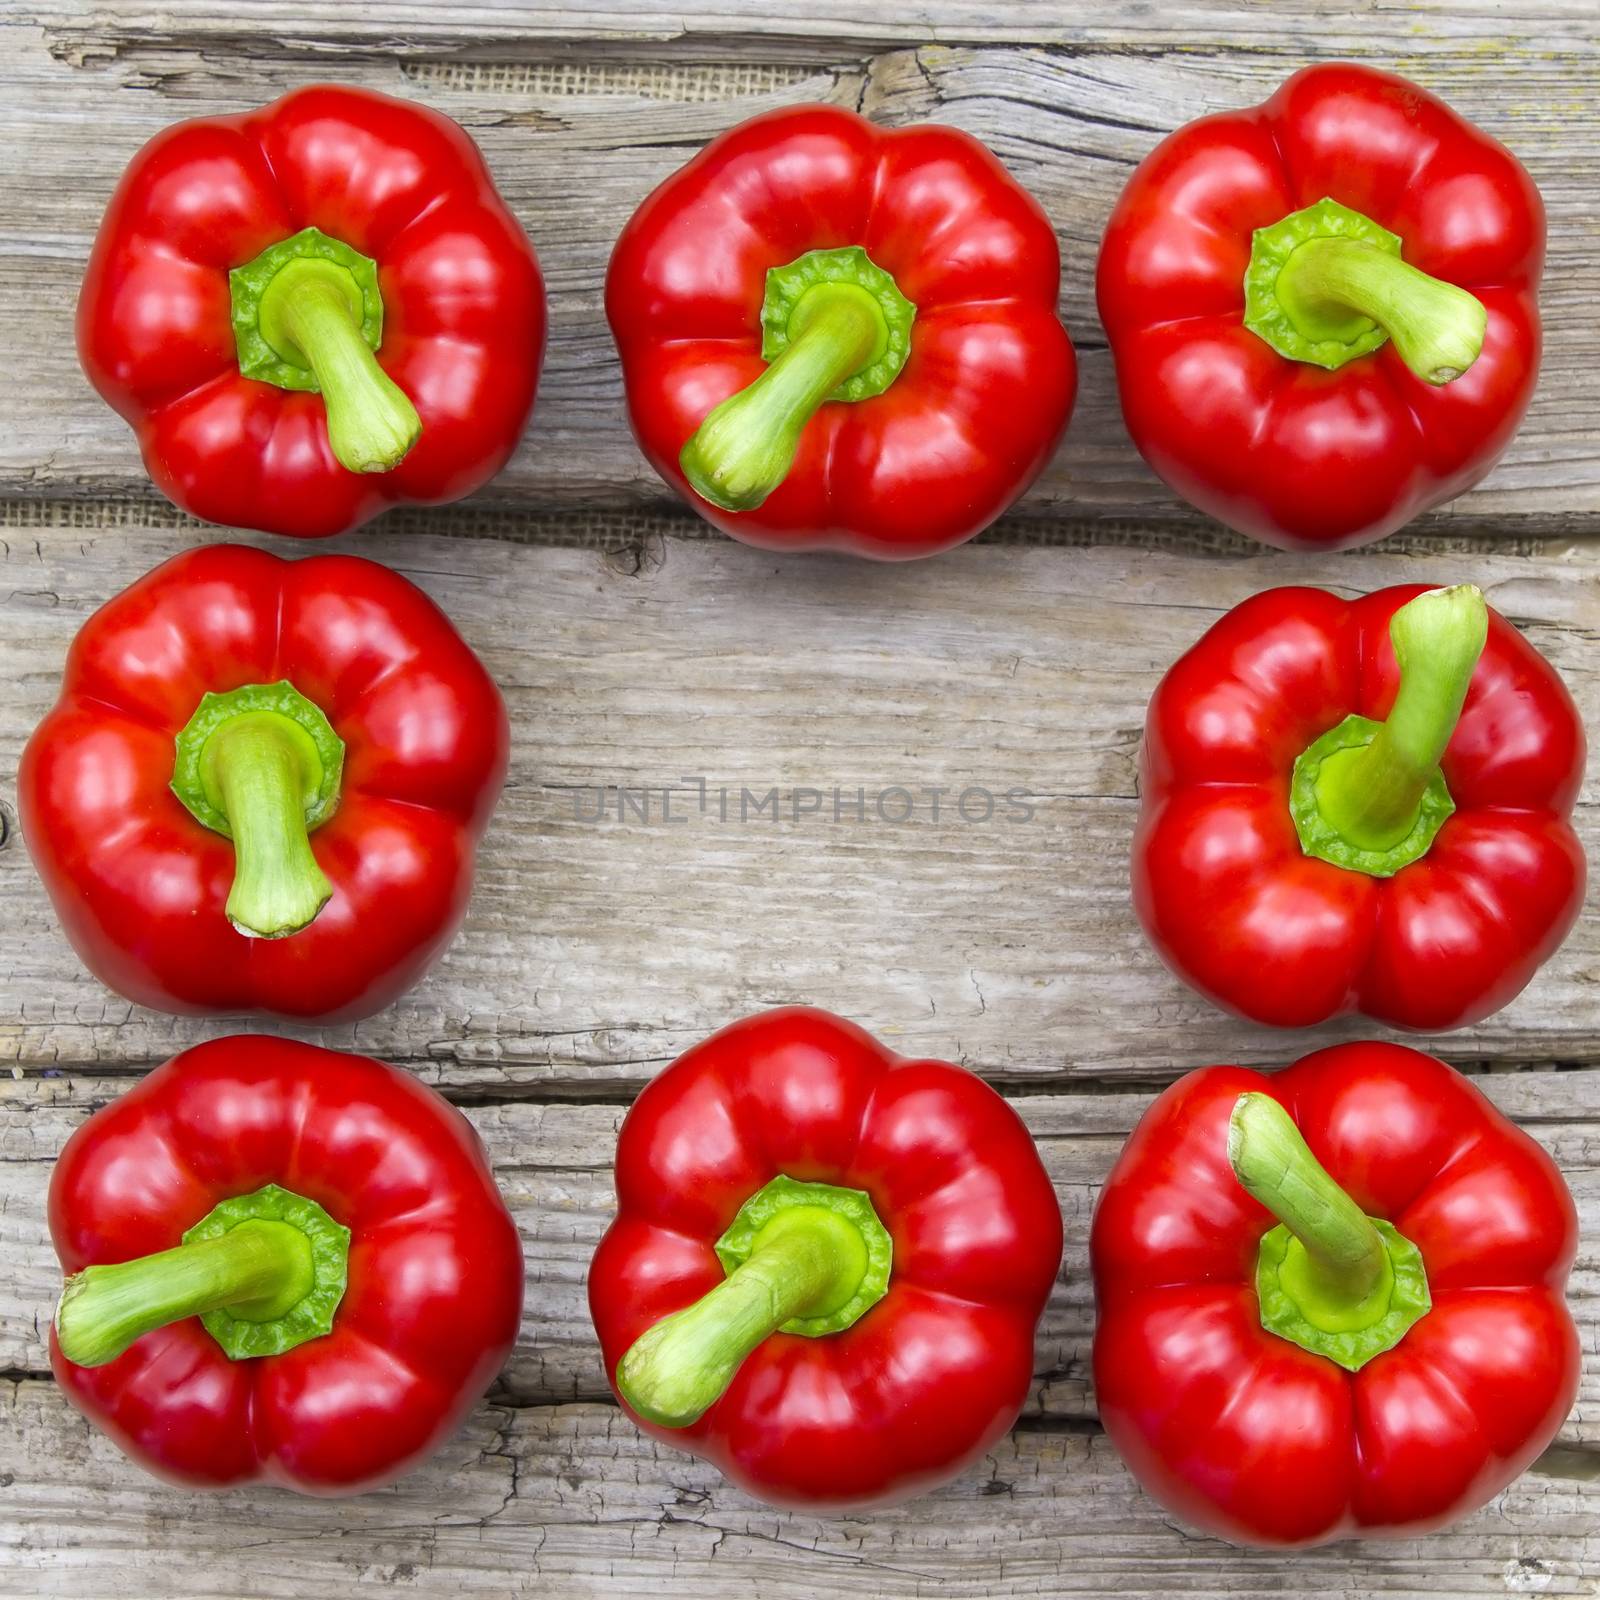 red peppers by miradrozdowski